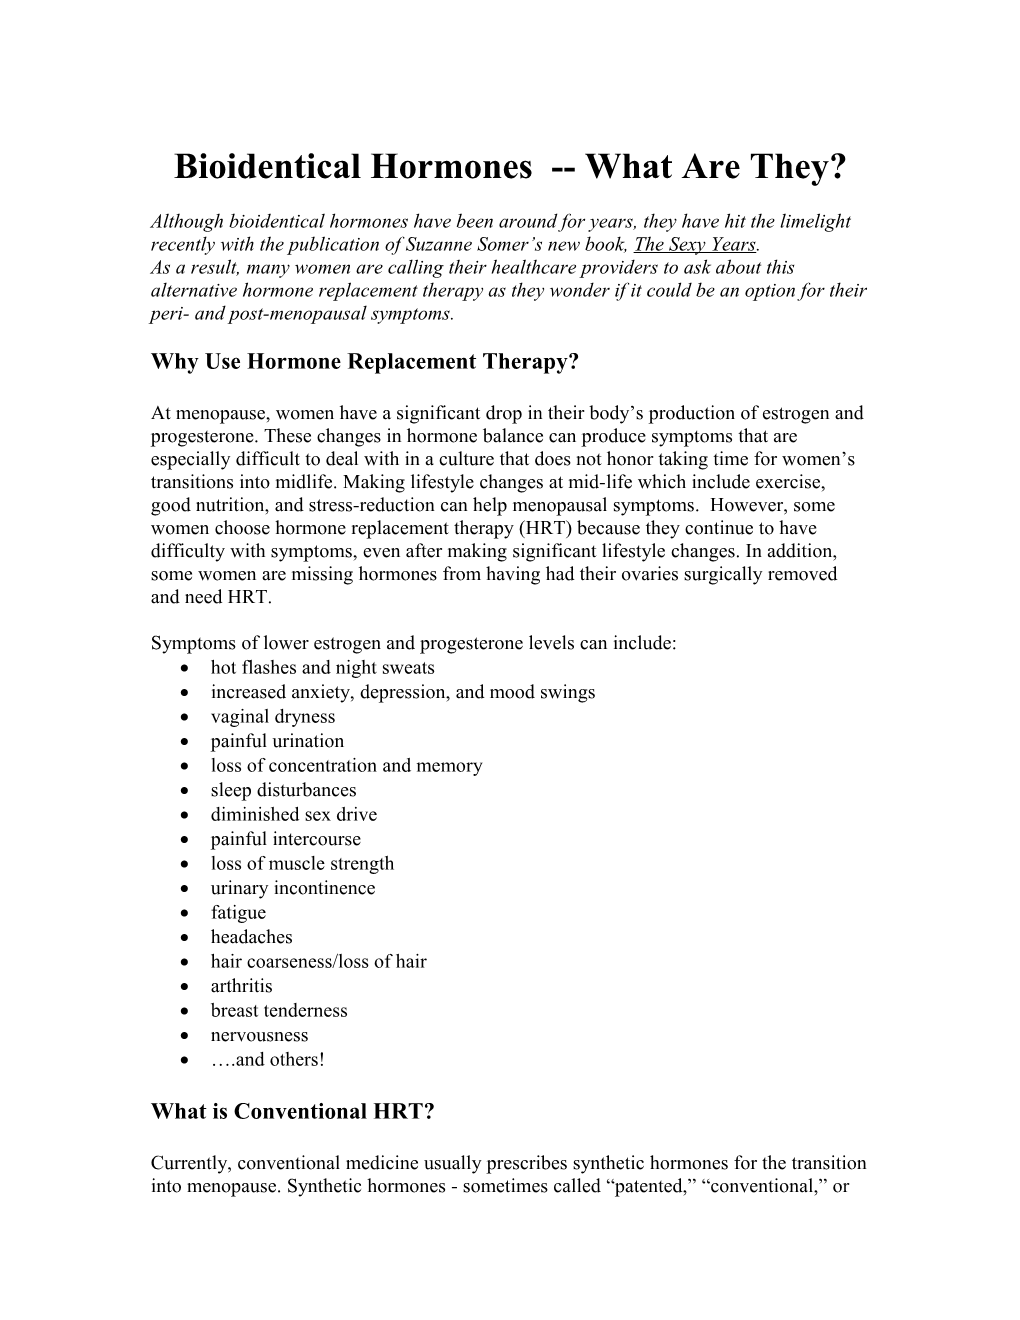 Bioidentical Hormones What Are They